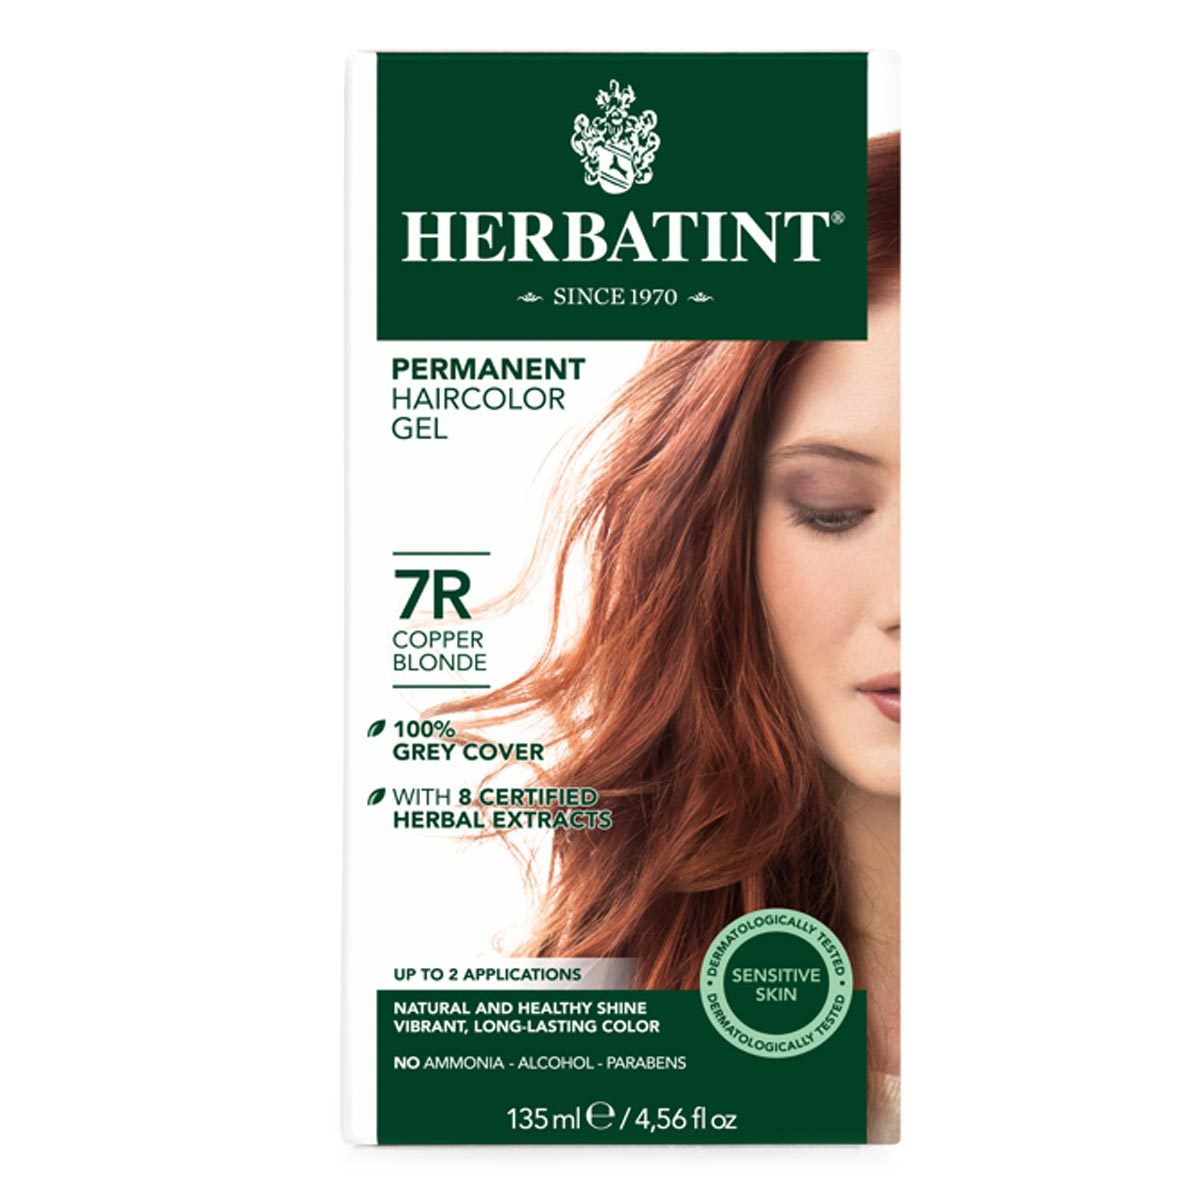 Primary image of 7R Copper Blonde Permanent Hair Color Gel